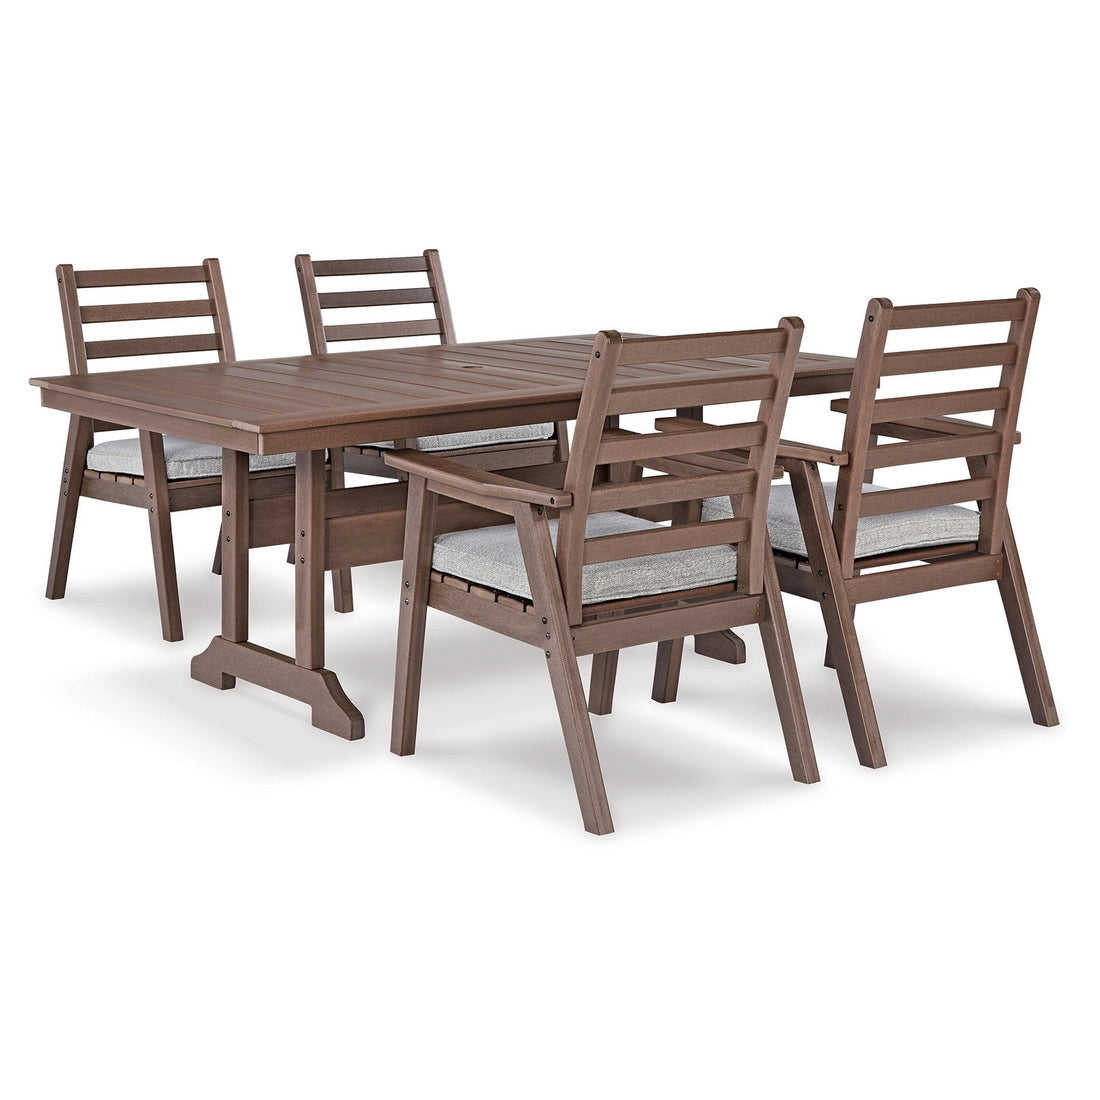 Emmeline Outdoor Dining Table with 4 Chairs Ash-P420P3